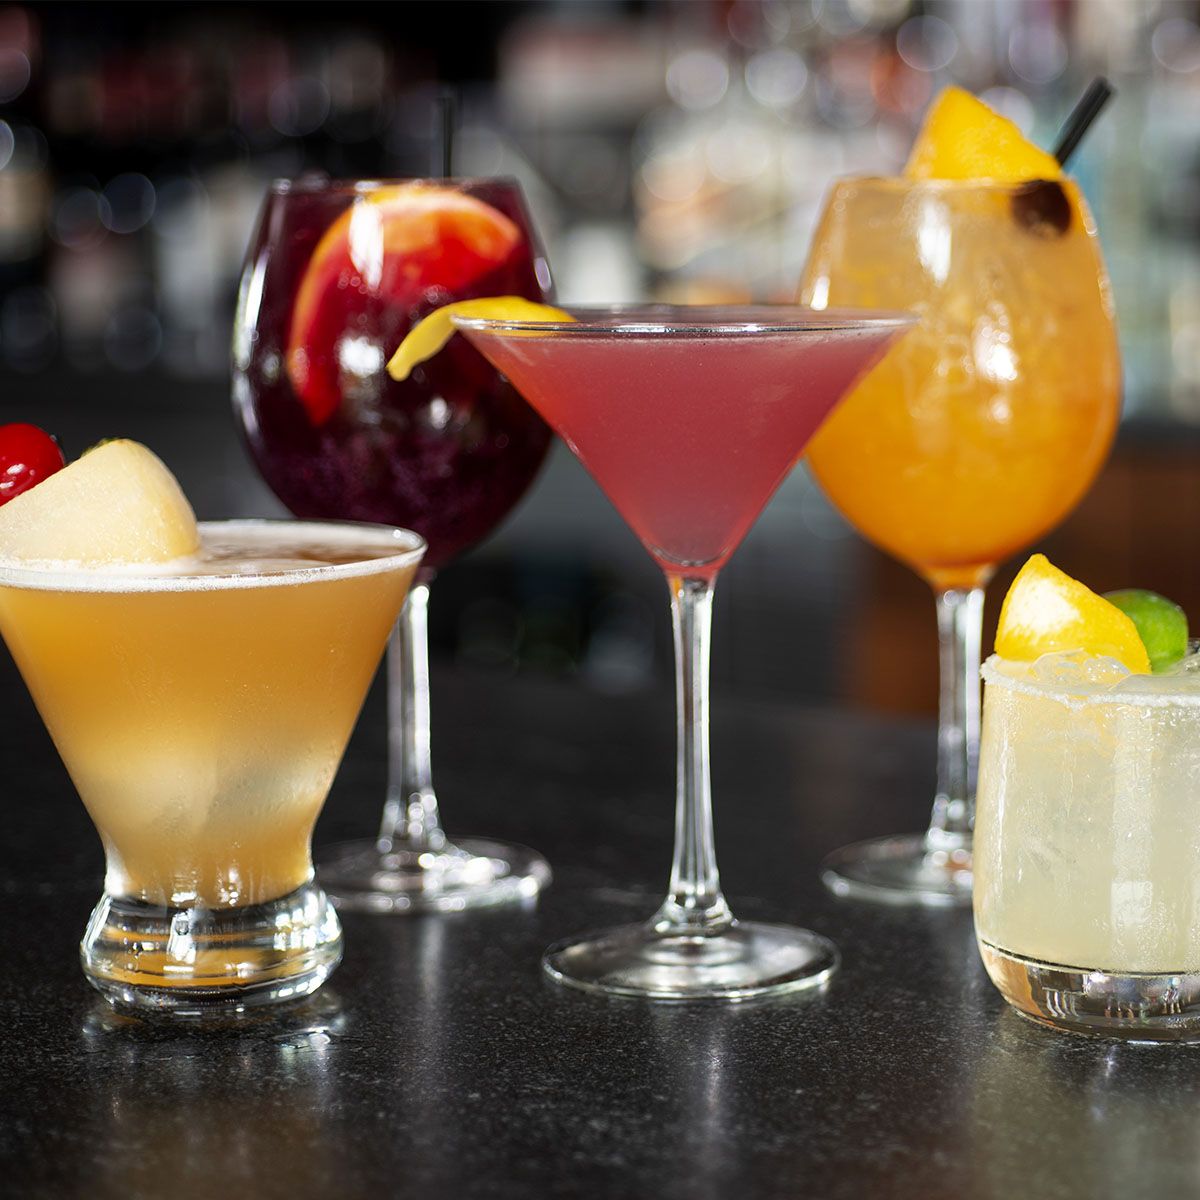 A selection of different colored cocktails with fruit adornments at Burtons Framingham location